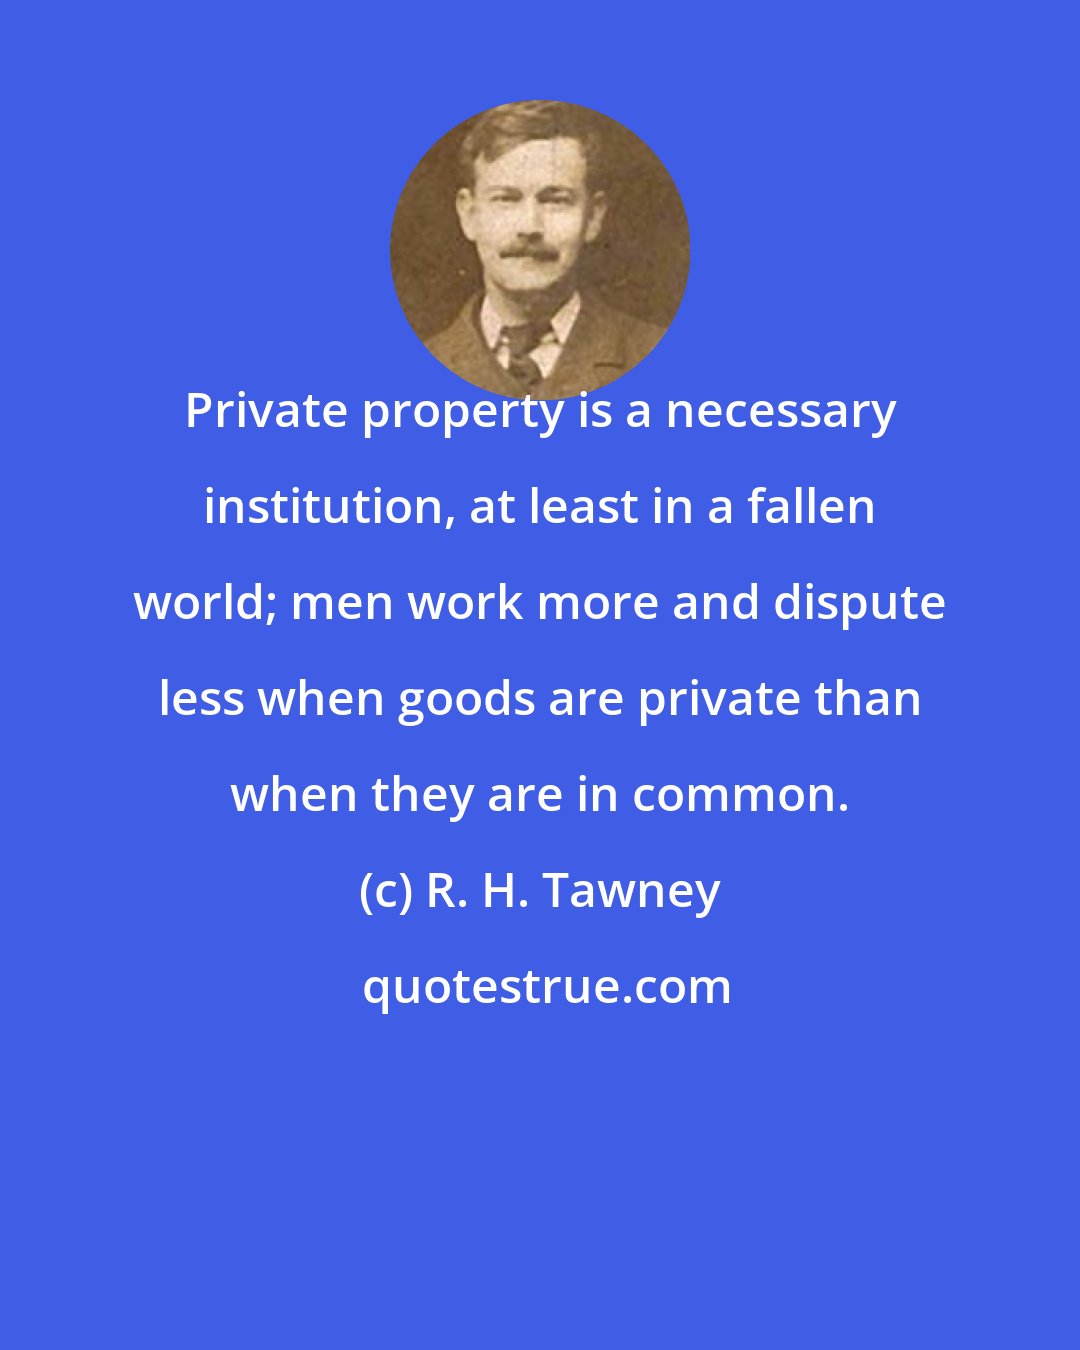 R. H. Tawney: Private property is a necessary institution, at least in a fallen world; men work more and dispute less when goods are private than when they are in common.